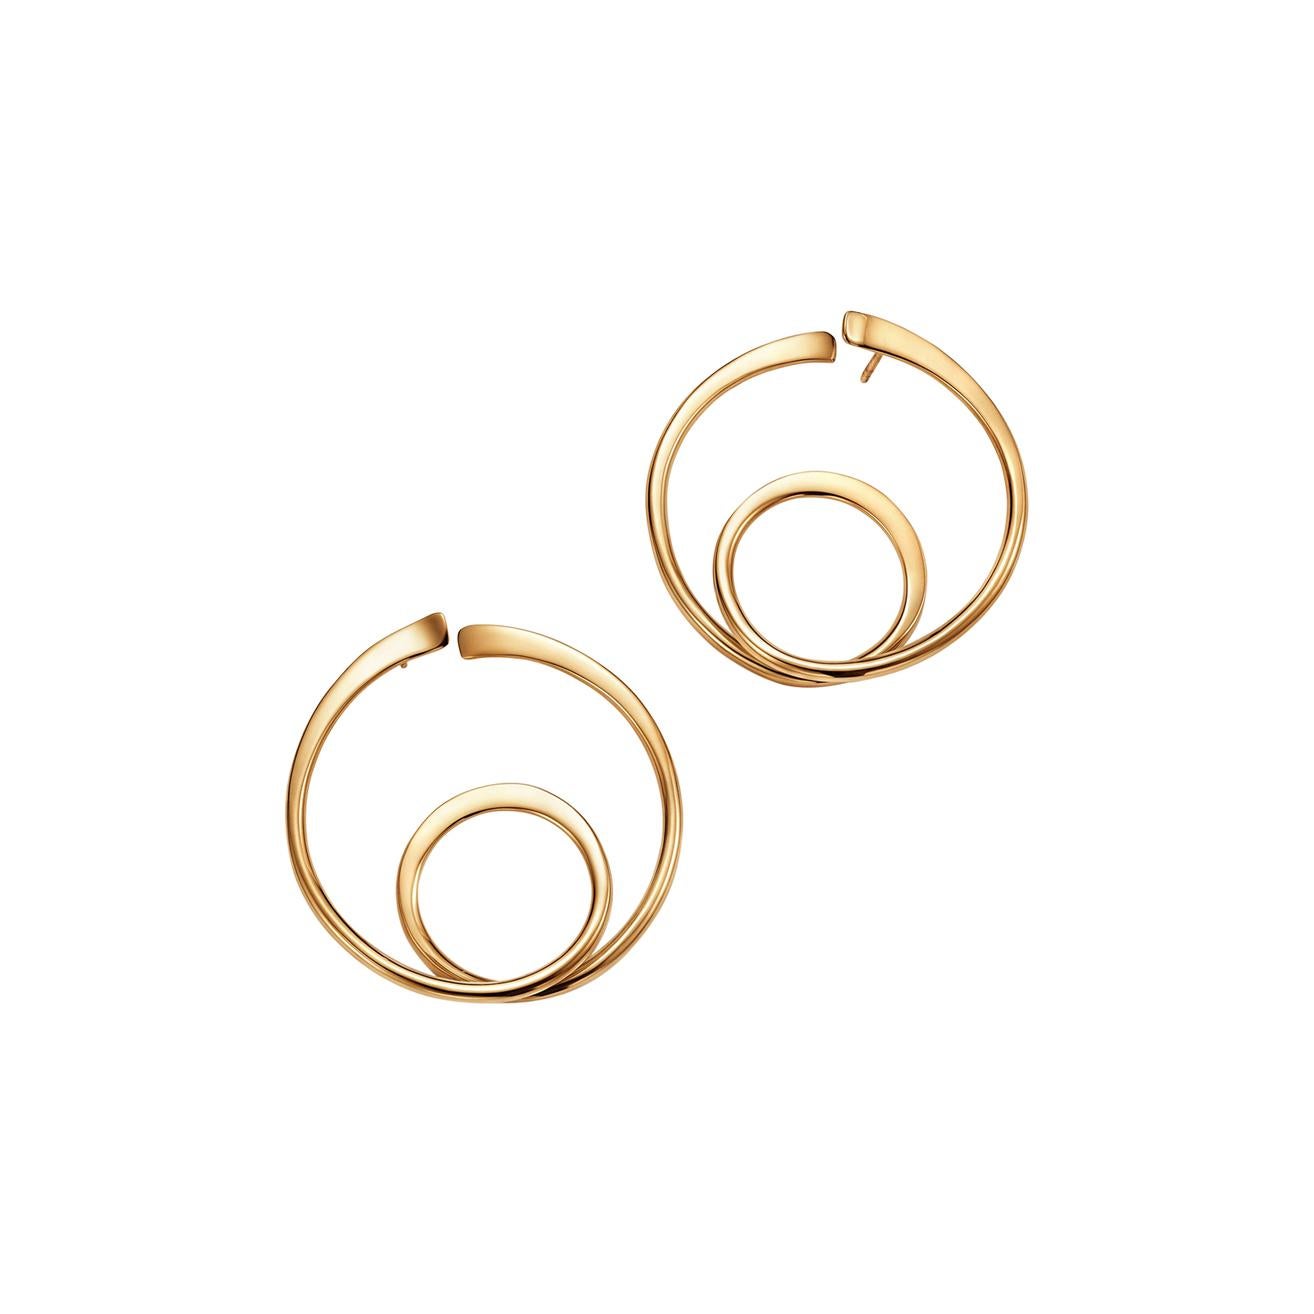 18kt Fairmined Ecological Yellow Gold Art Smith Double Hoop Earrings